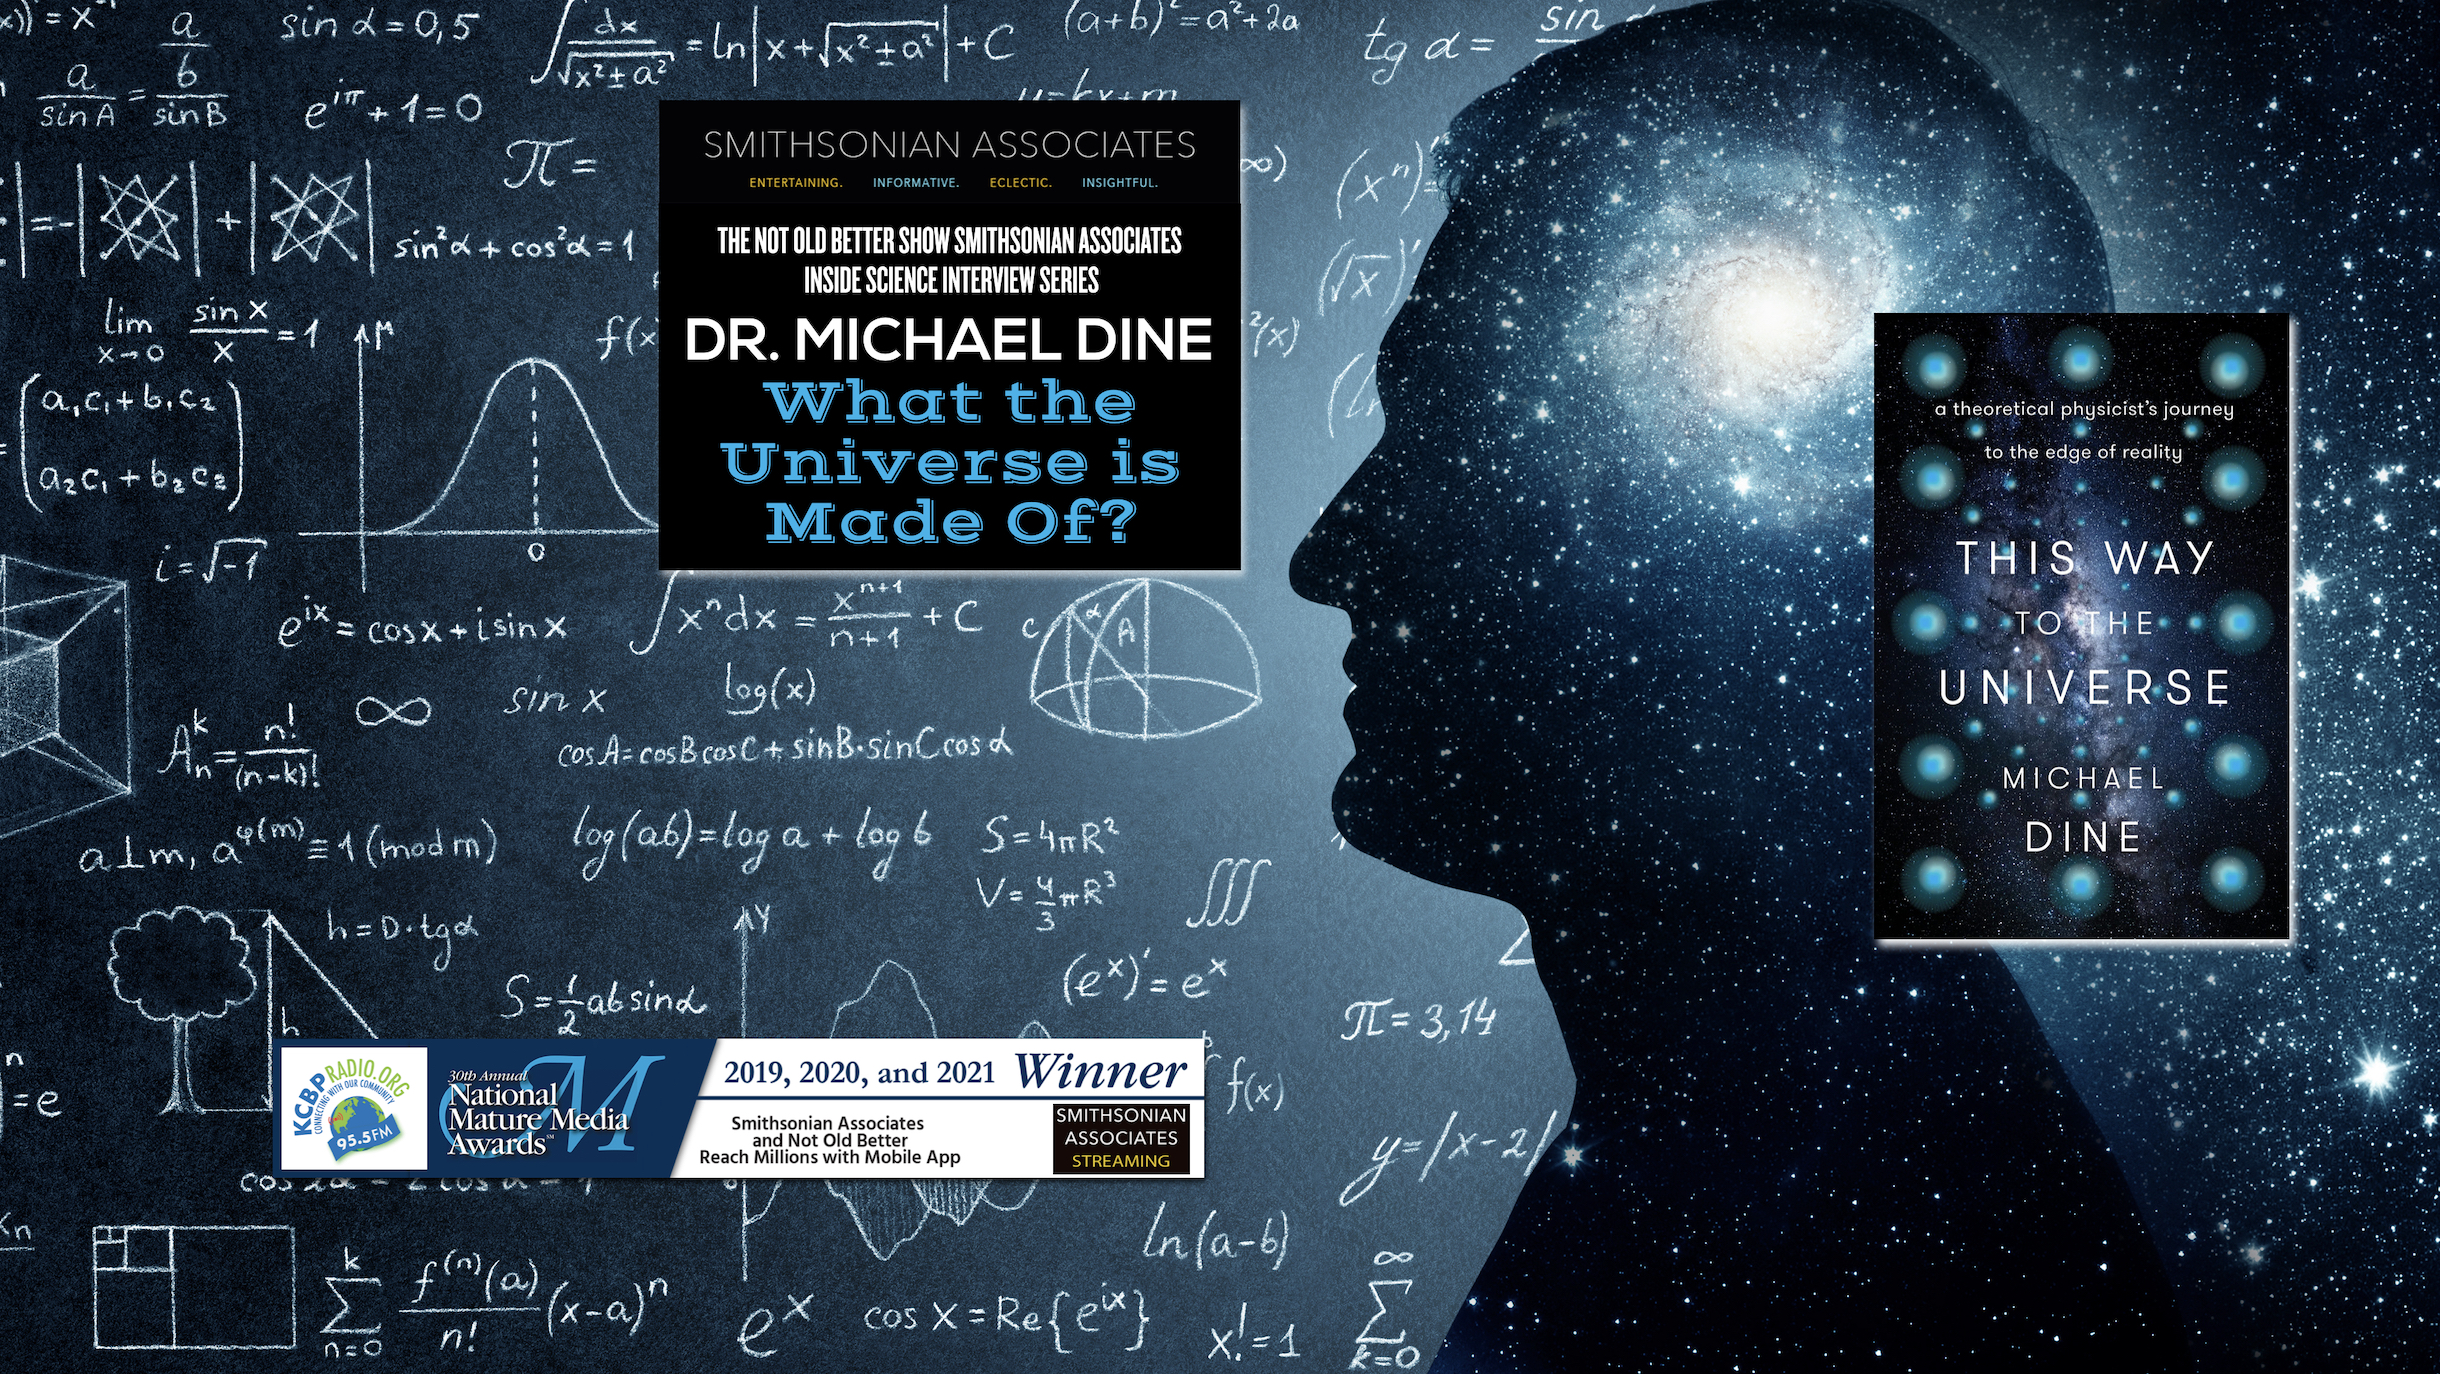 What The Universe is Made Of – Dr. Michael Dine